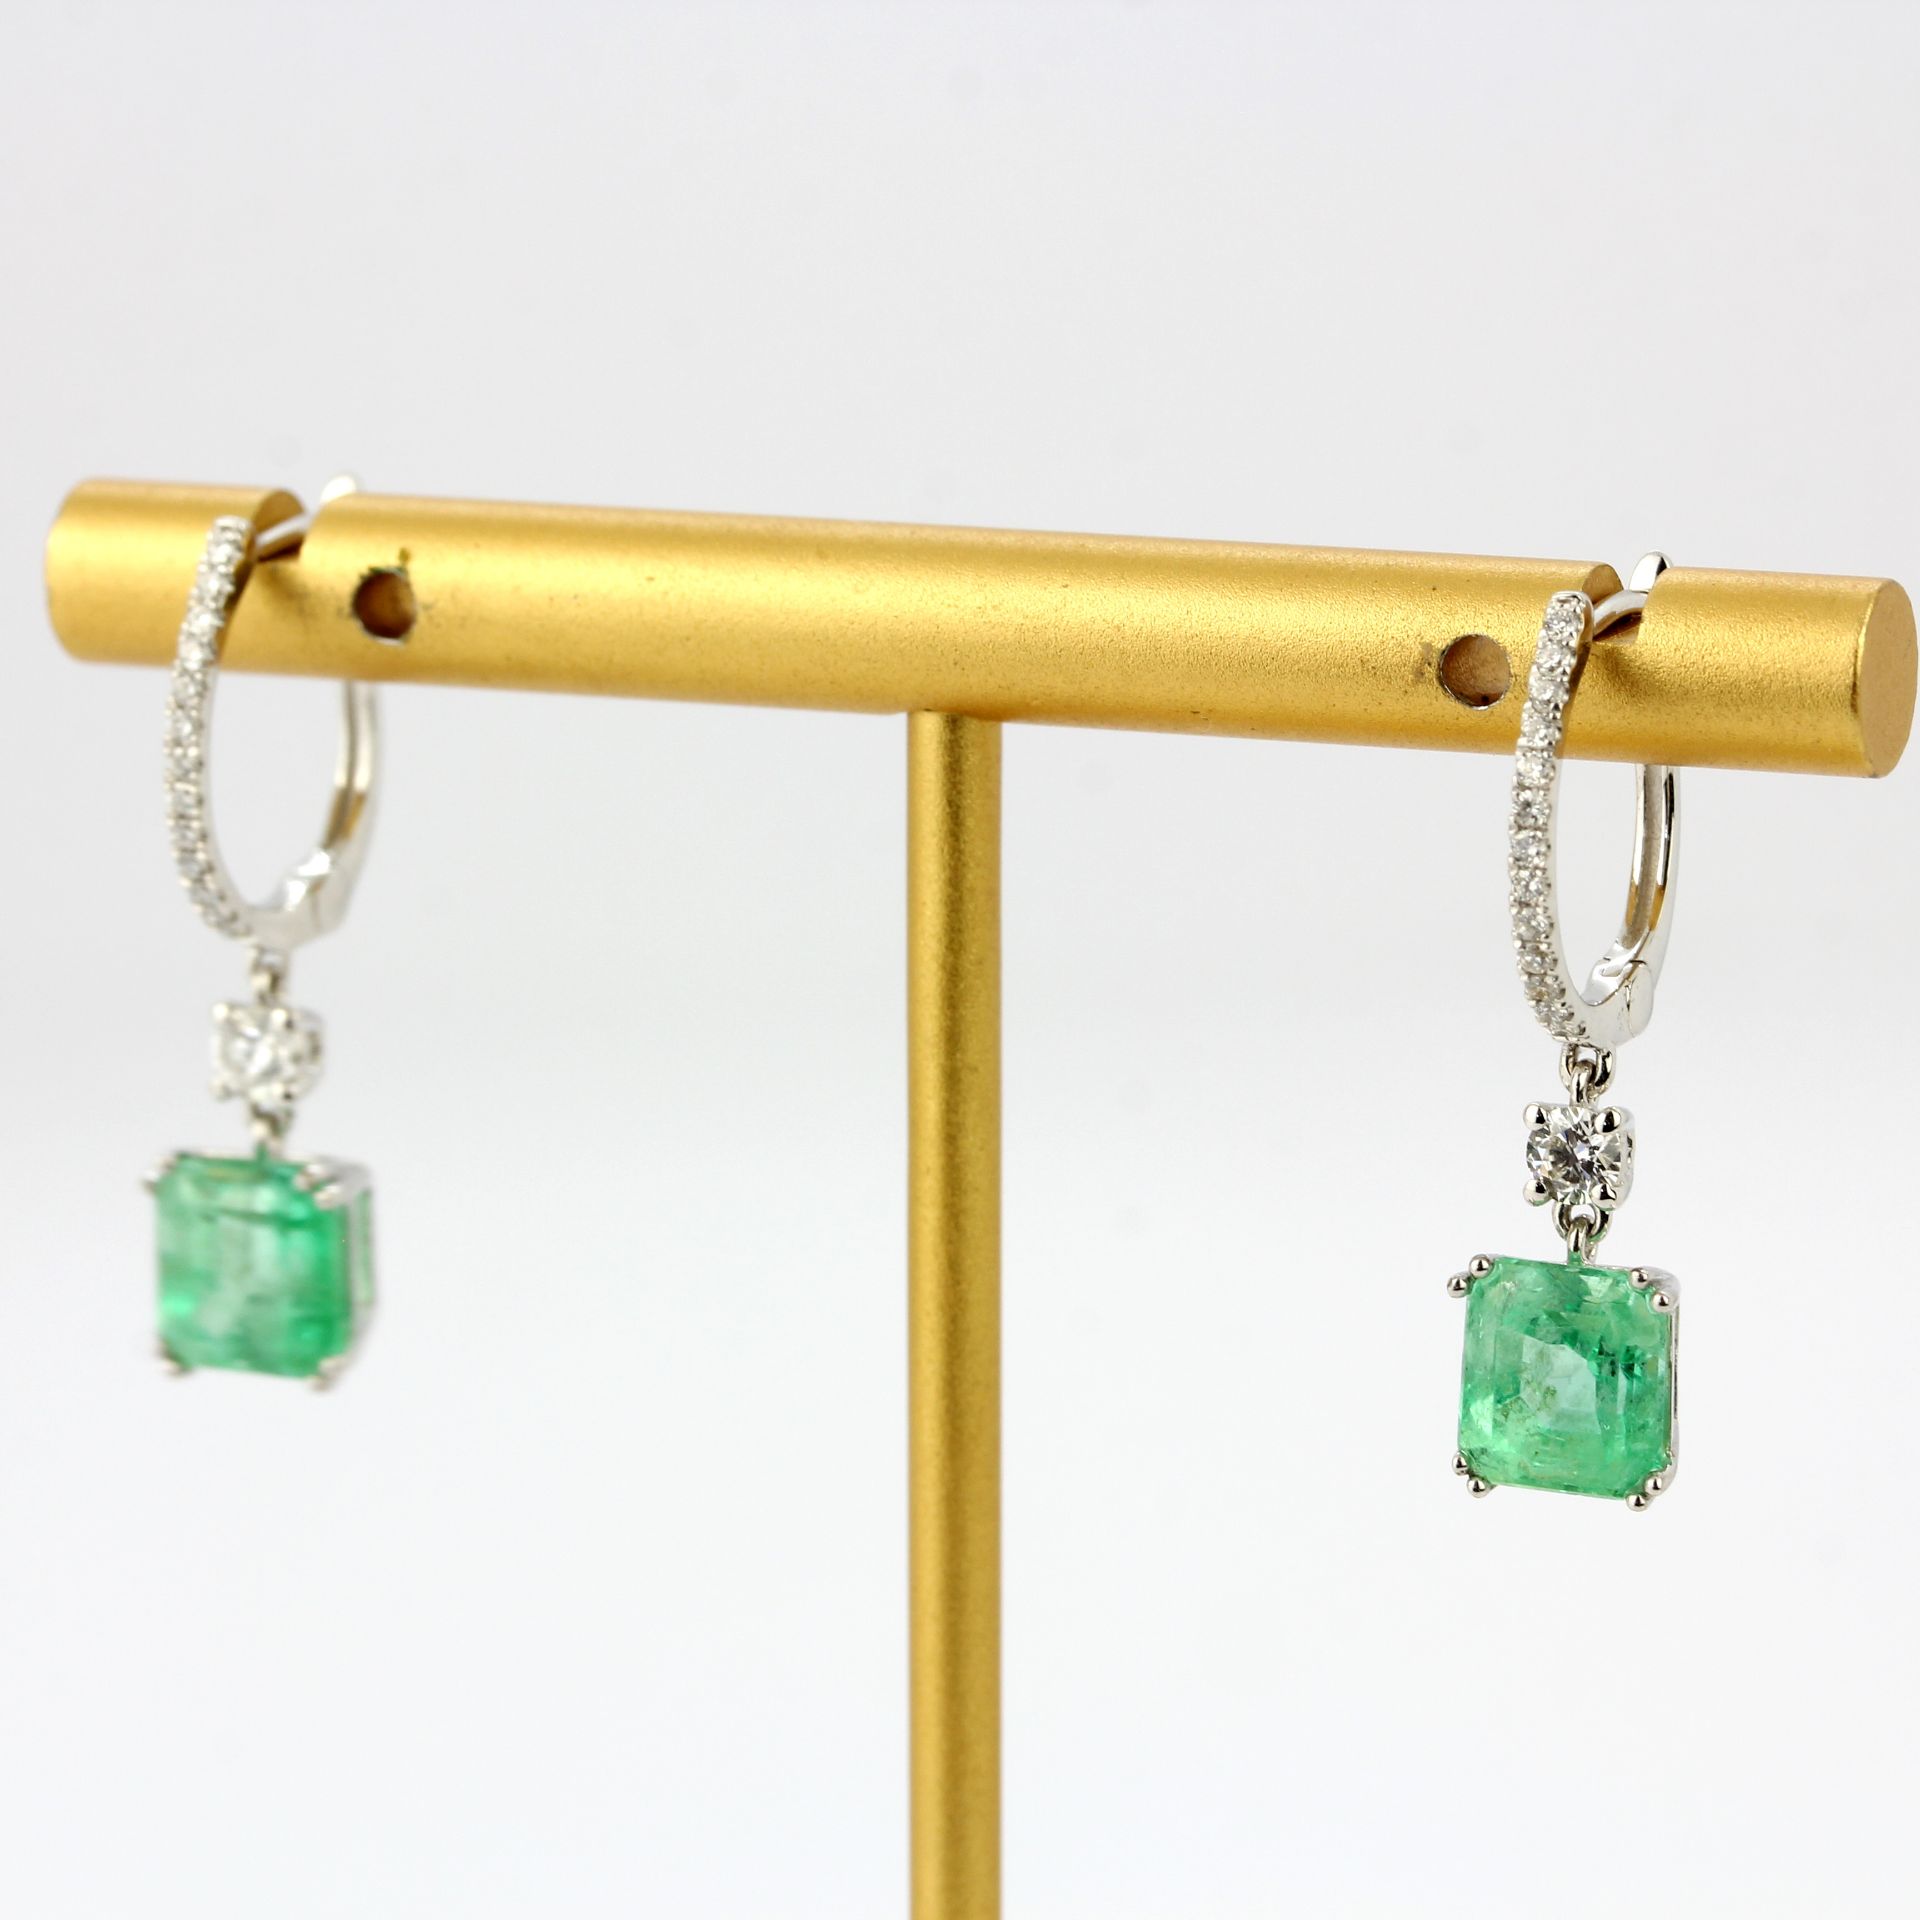 A pair of 18ct white gold drop earrings set with emerald cut emeralds and diamonds, L. 2.7cm. - Image 2 of 3